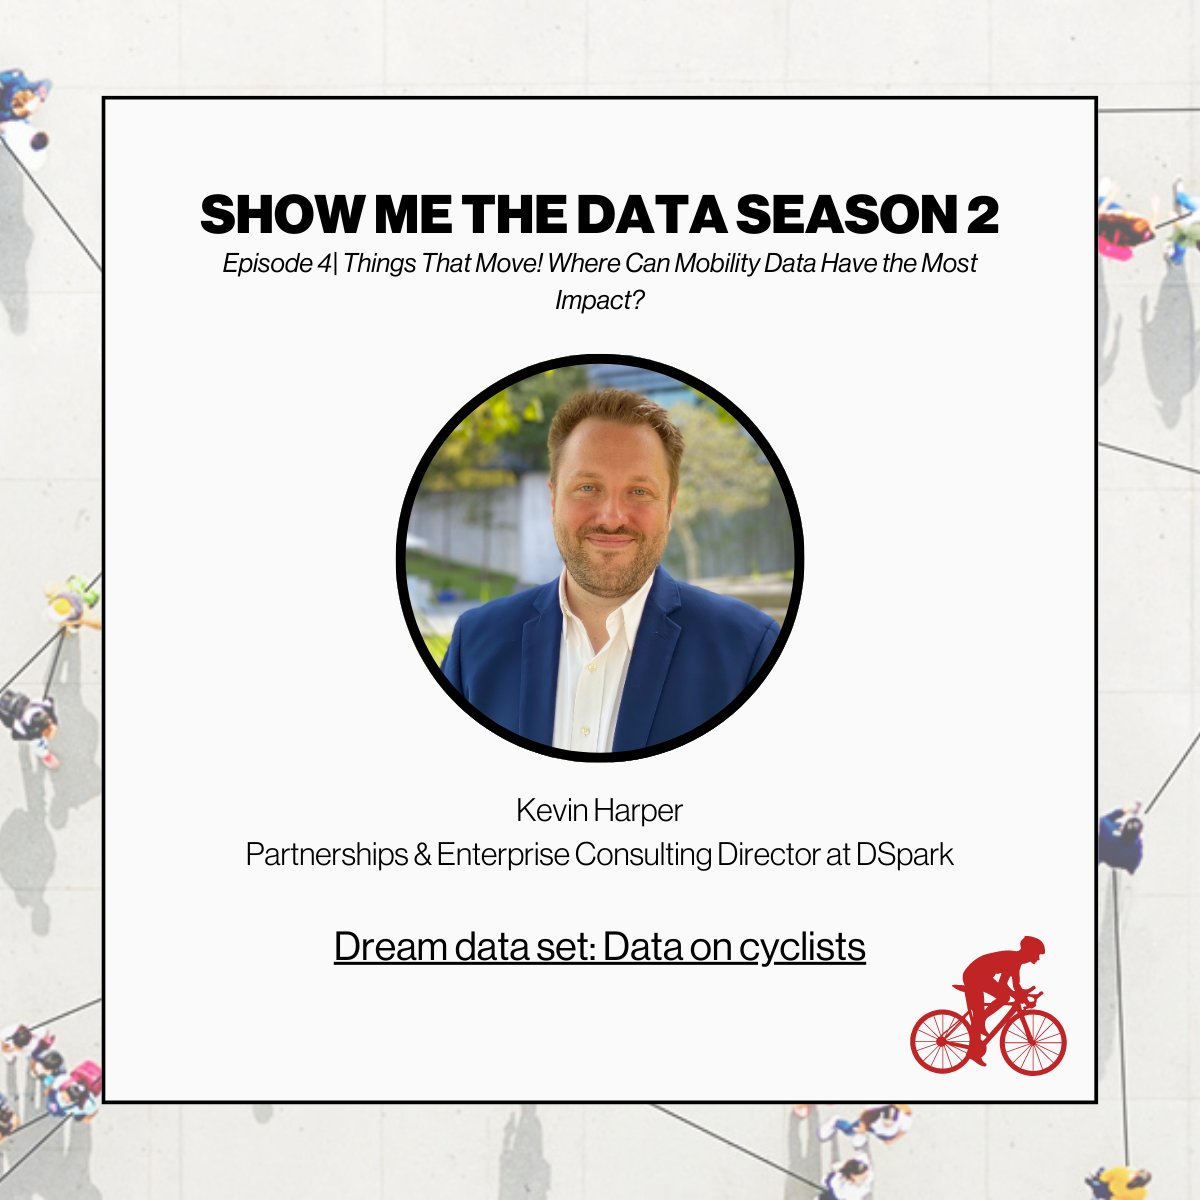 🚴‍♂️On Episode 4 of Season 2 of the #SMTD podcast, Kevin talk about his dream dataset, 'cycling data'! At DSpark, travel mode data is tricky due to speed ambiguity—pedestrians can look like vehicles! Listen to the conversation again here: 🎧 bit.ly/smtd-s2e4